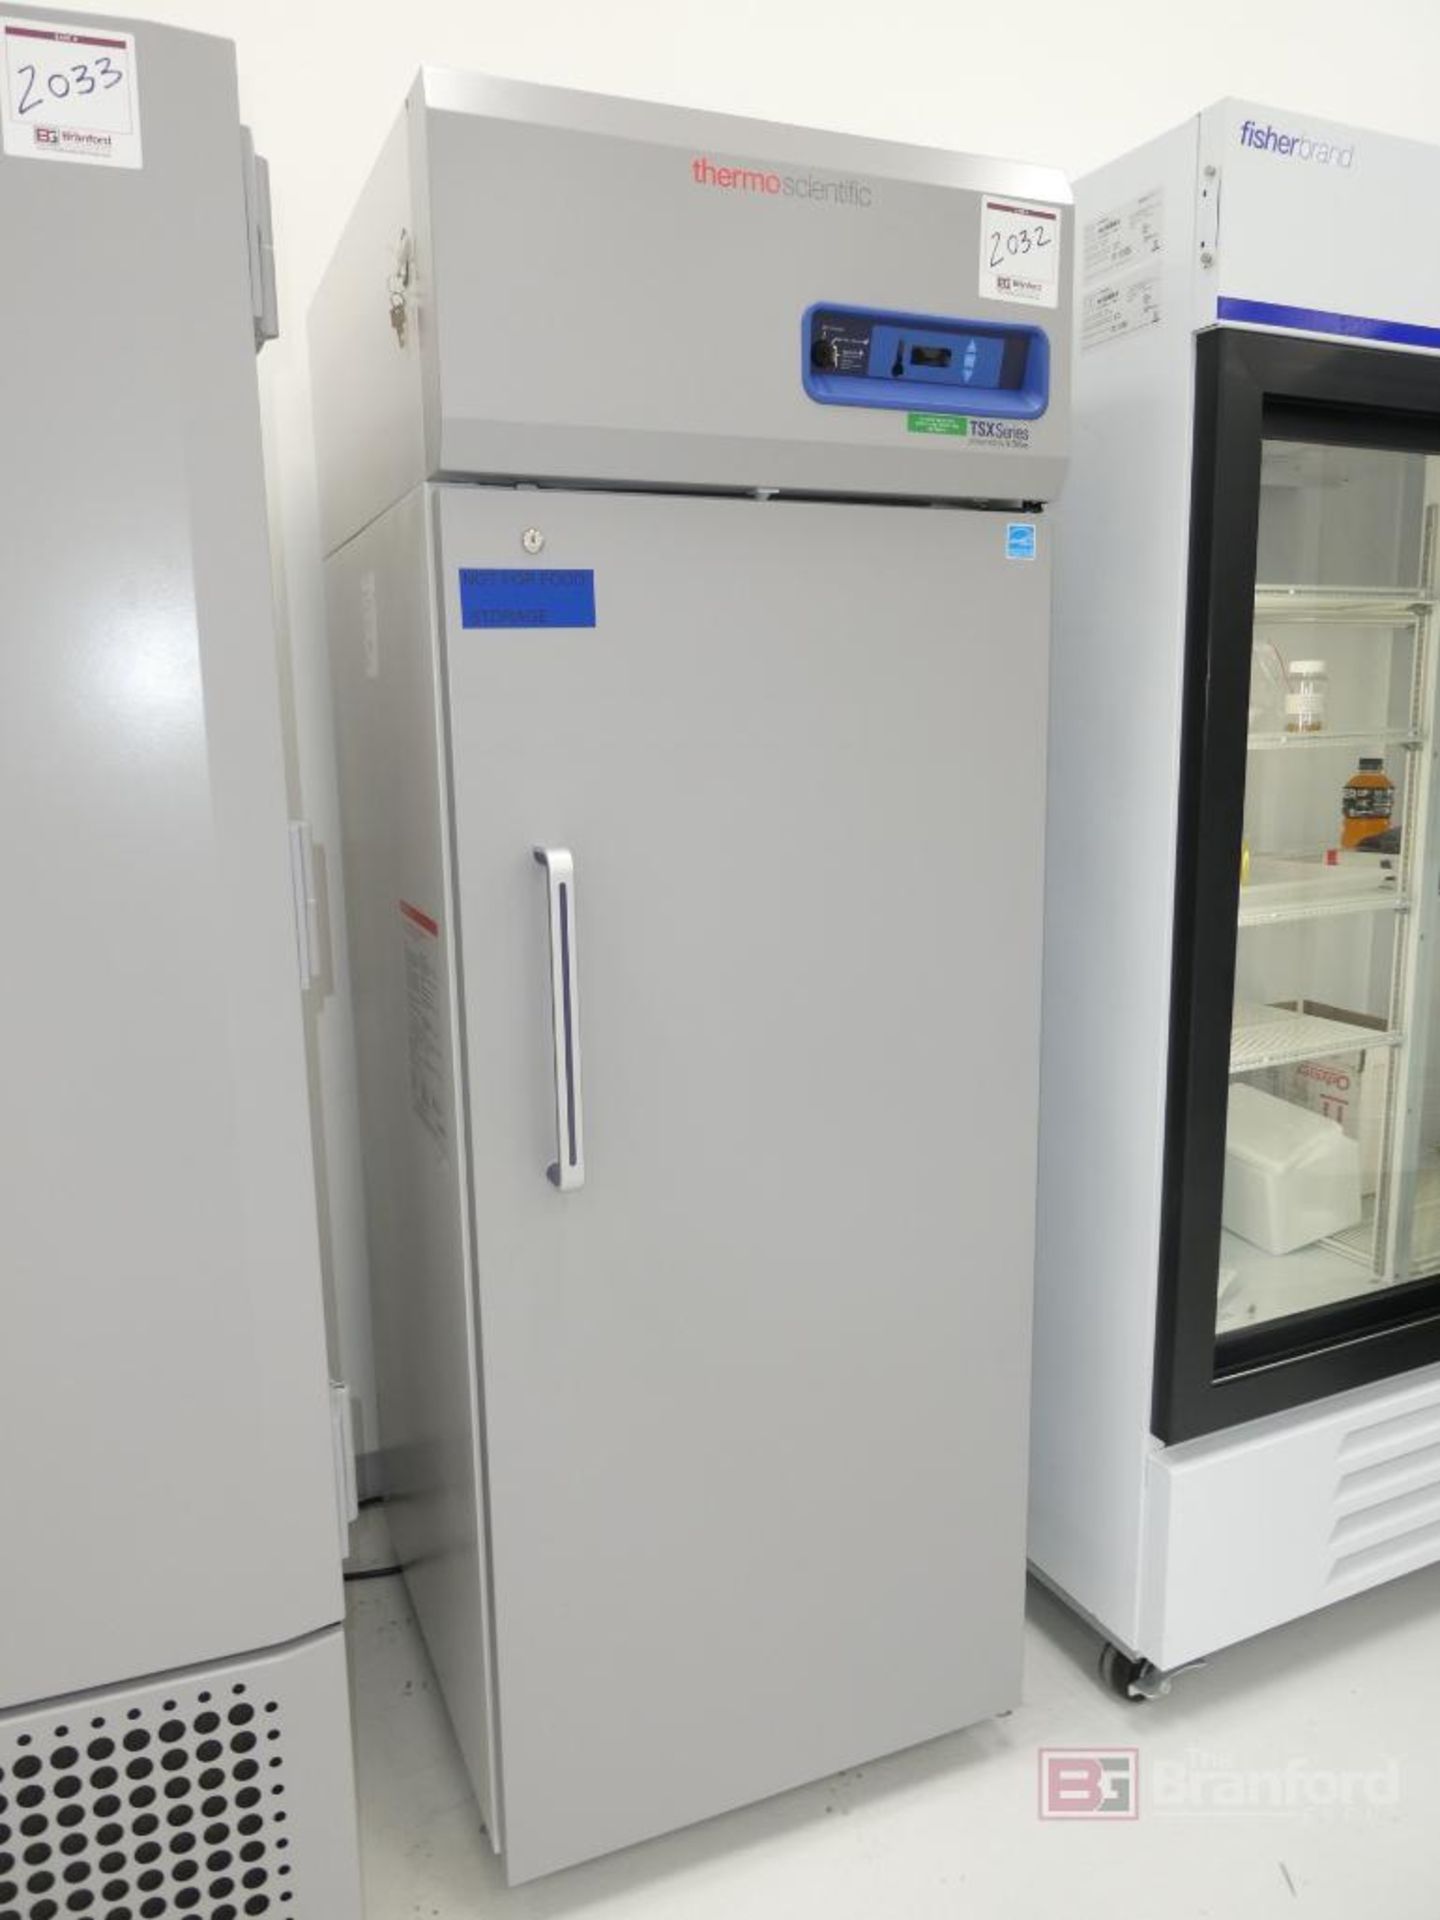 ThermoFisher Scientific Model TSX2320FA, TSX Series Ultra-Low Single Door Freezer - Image 2 of 5